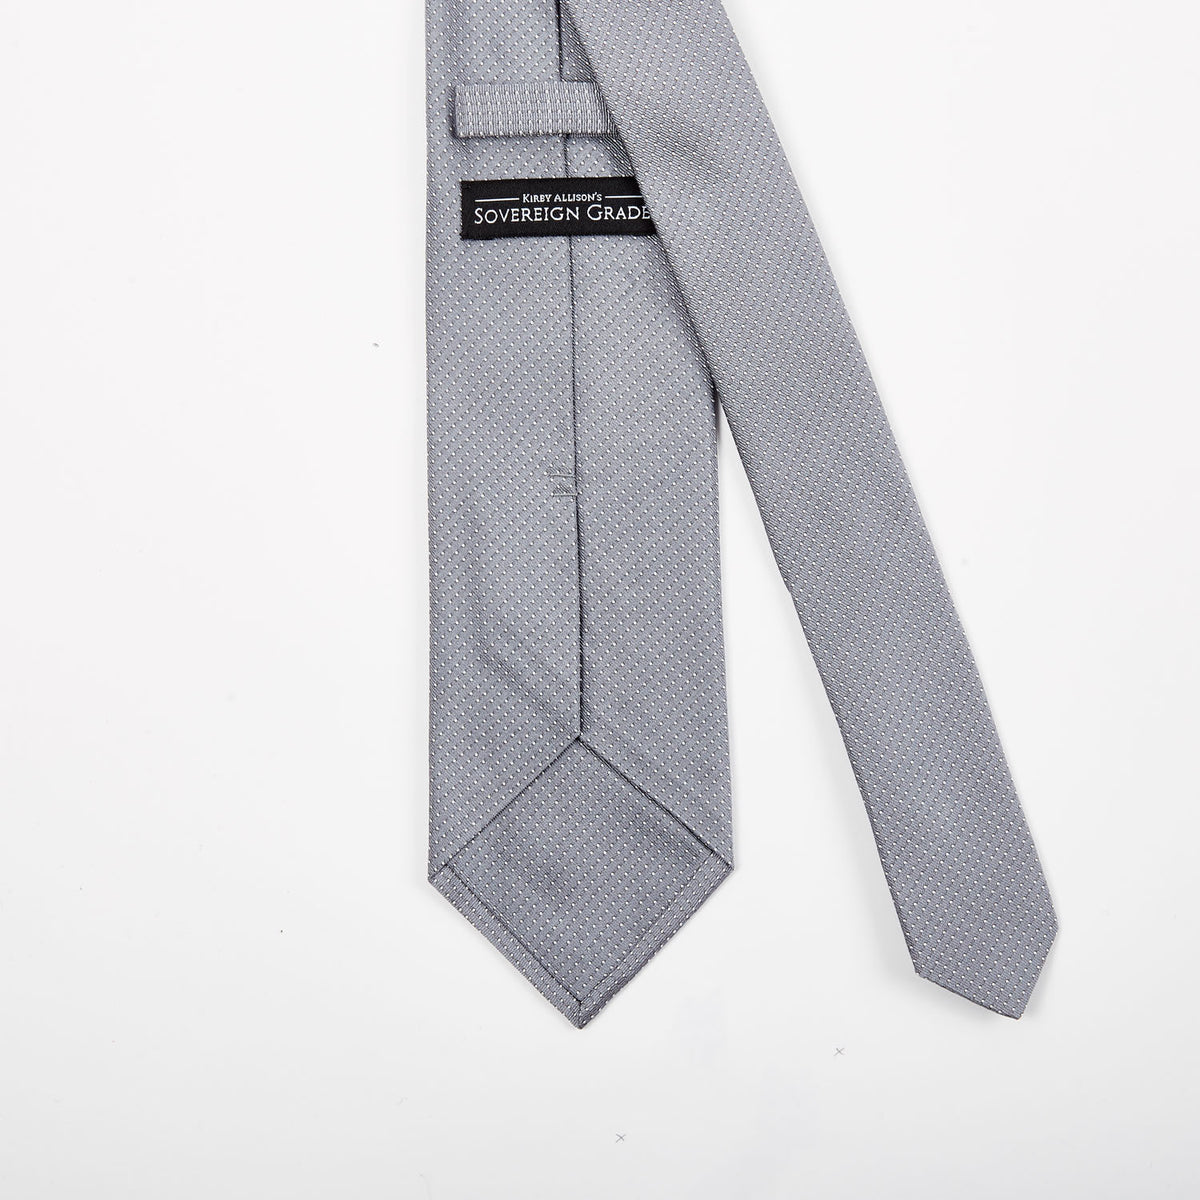 A Sovereign Grade Silver Silk Micro Dot Tie by KirbyAllison.com on a white background.